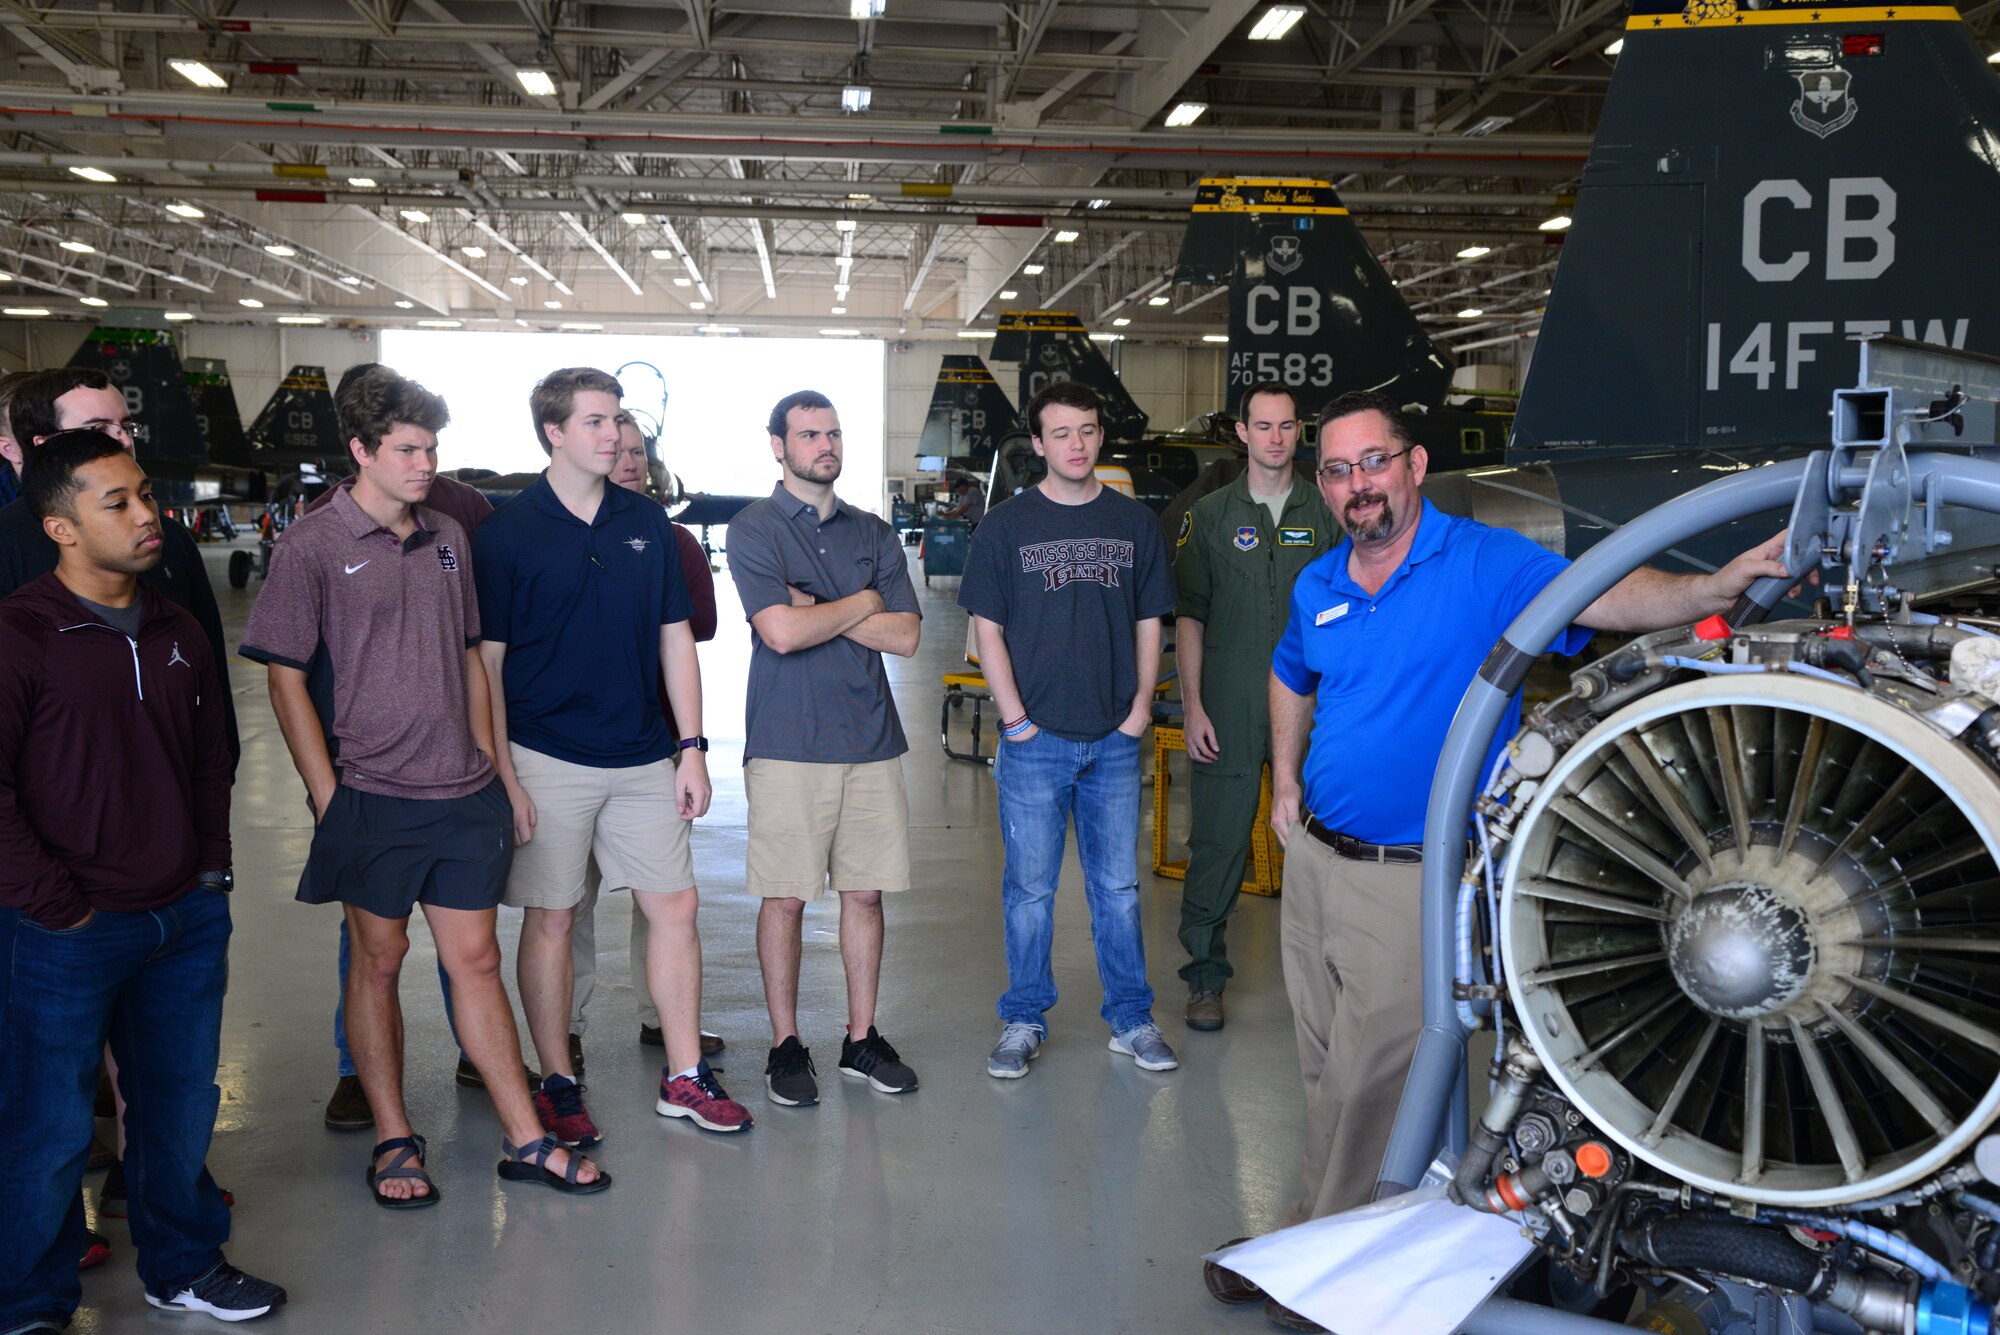 Charles Hill, L3 Communications T-38C Talon foreman, talks with the Mississippi State University Aircraft Propulsion Class about a T-38 engine April 4, 2018, on Columbus Air Force Base, Mississippi. The students visited the 14th Operations Group aircraft simulators, BLAZE Hangar and the L3 Propulsion Lab. (U.S. Air Force photo by Airman 1st Class Beaux Hebert)